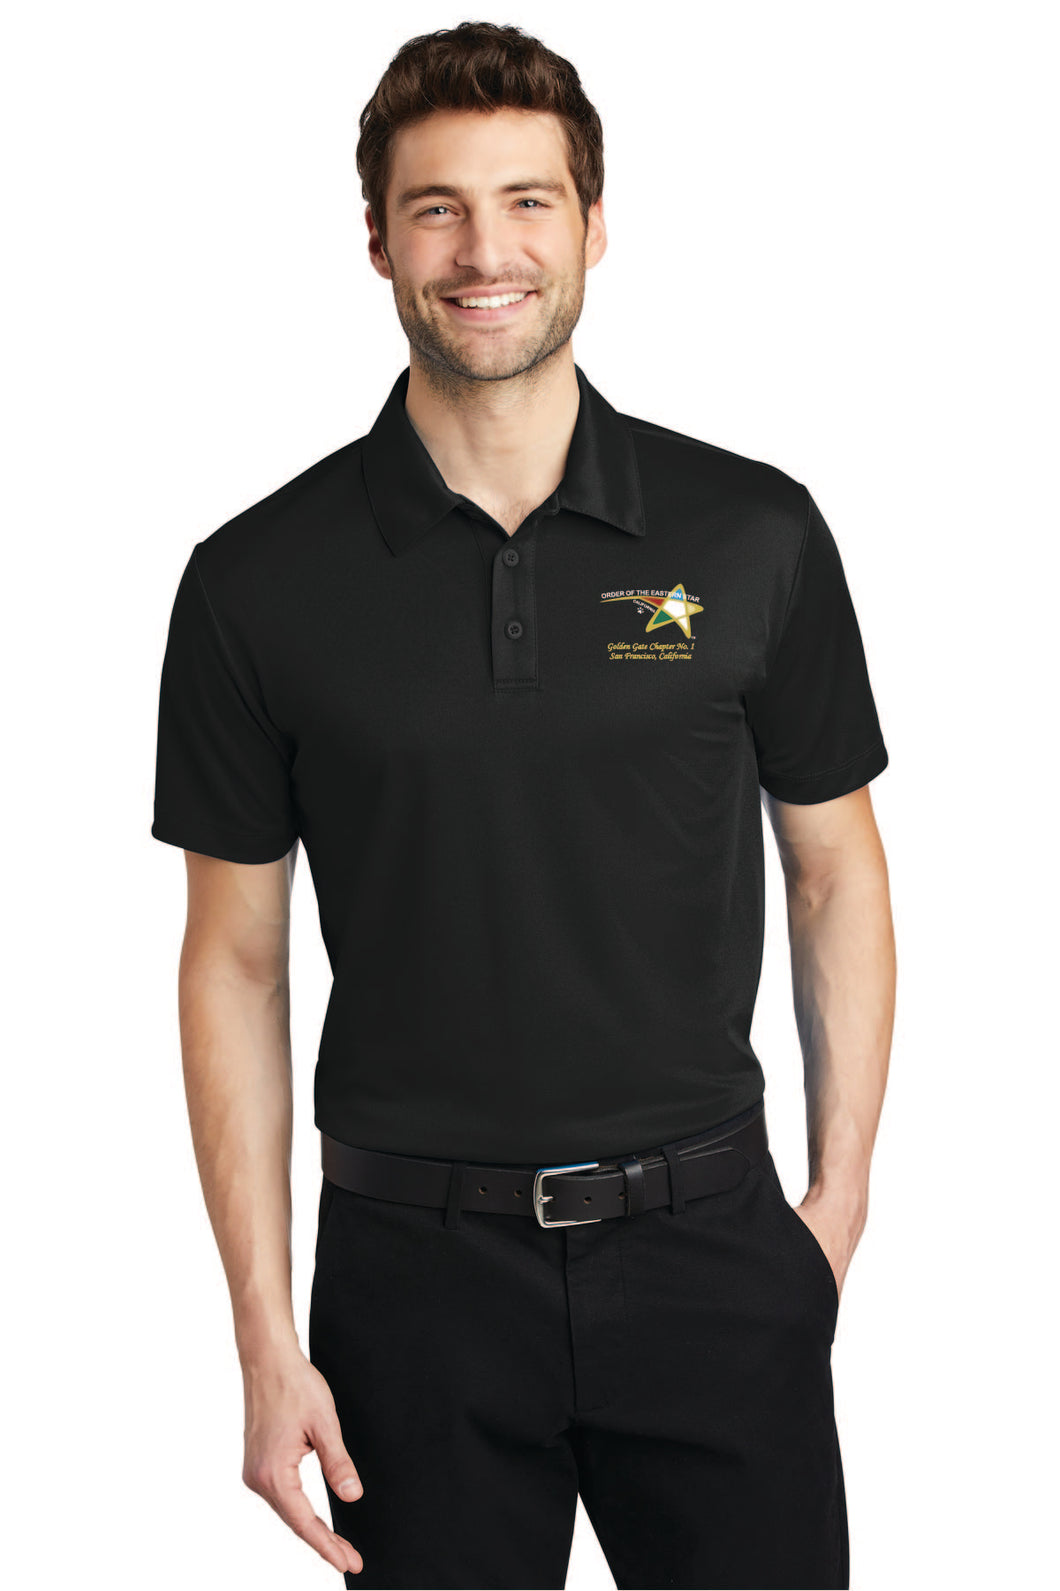 OES Golden Gate Chapter Polo Ladies + Mens